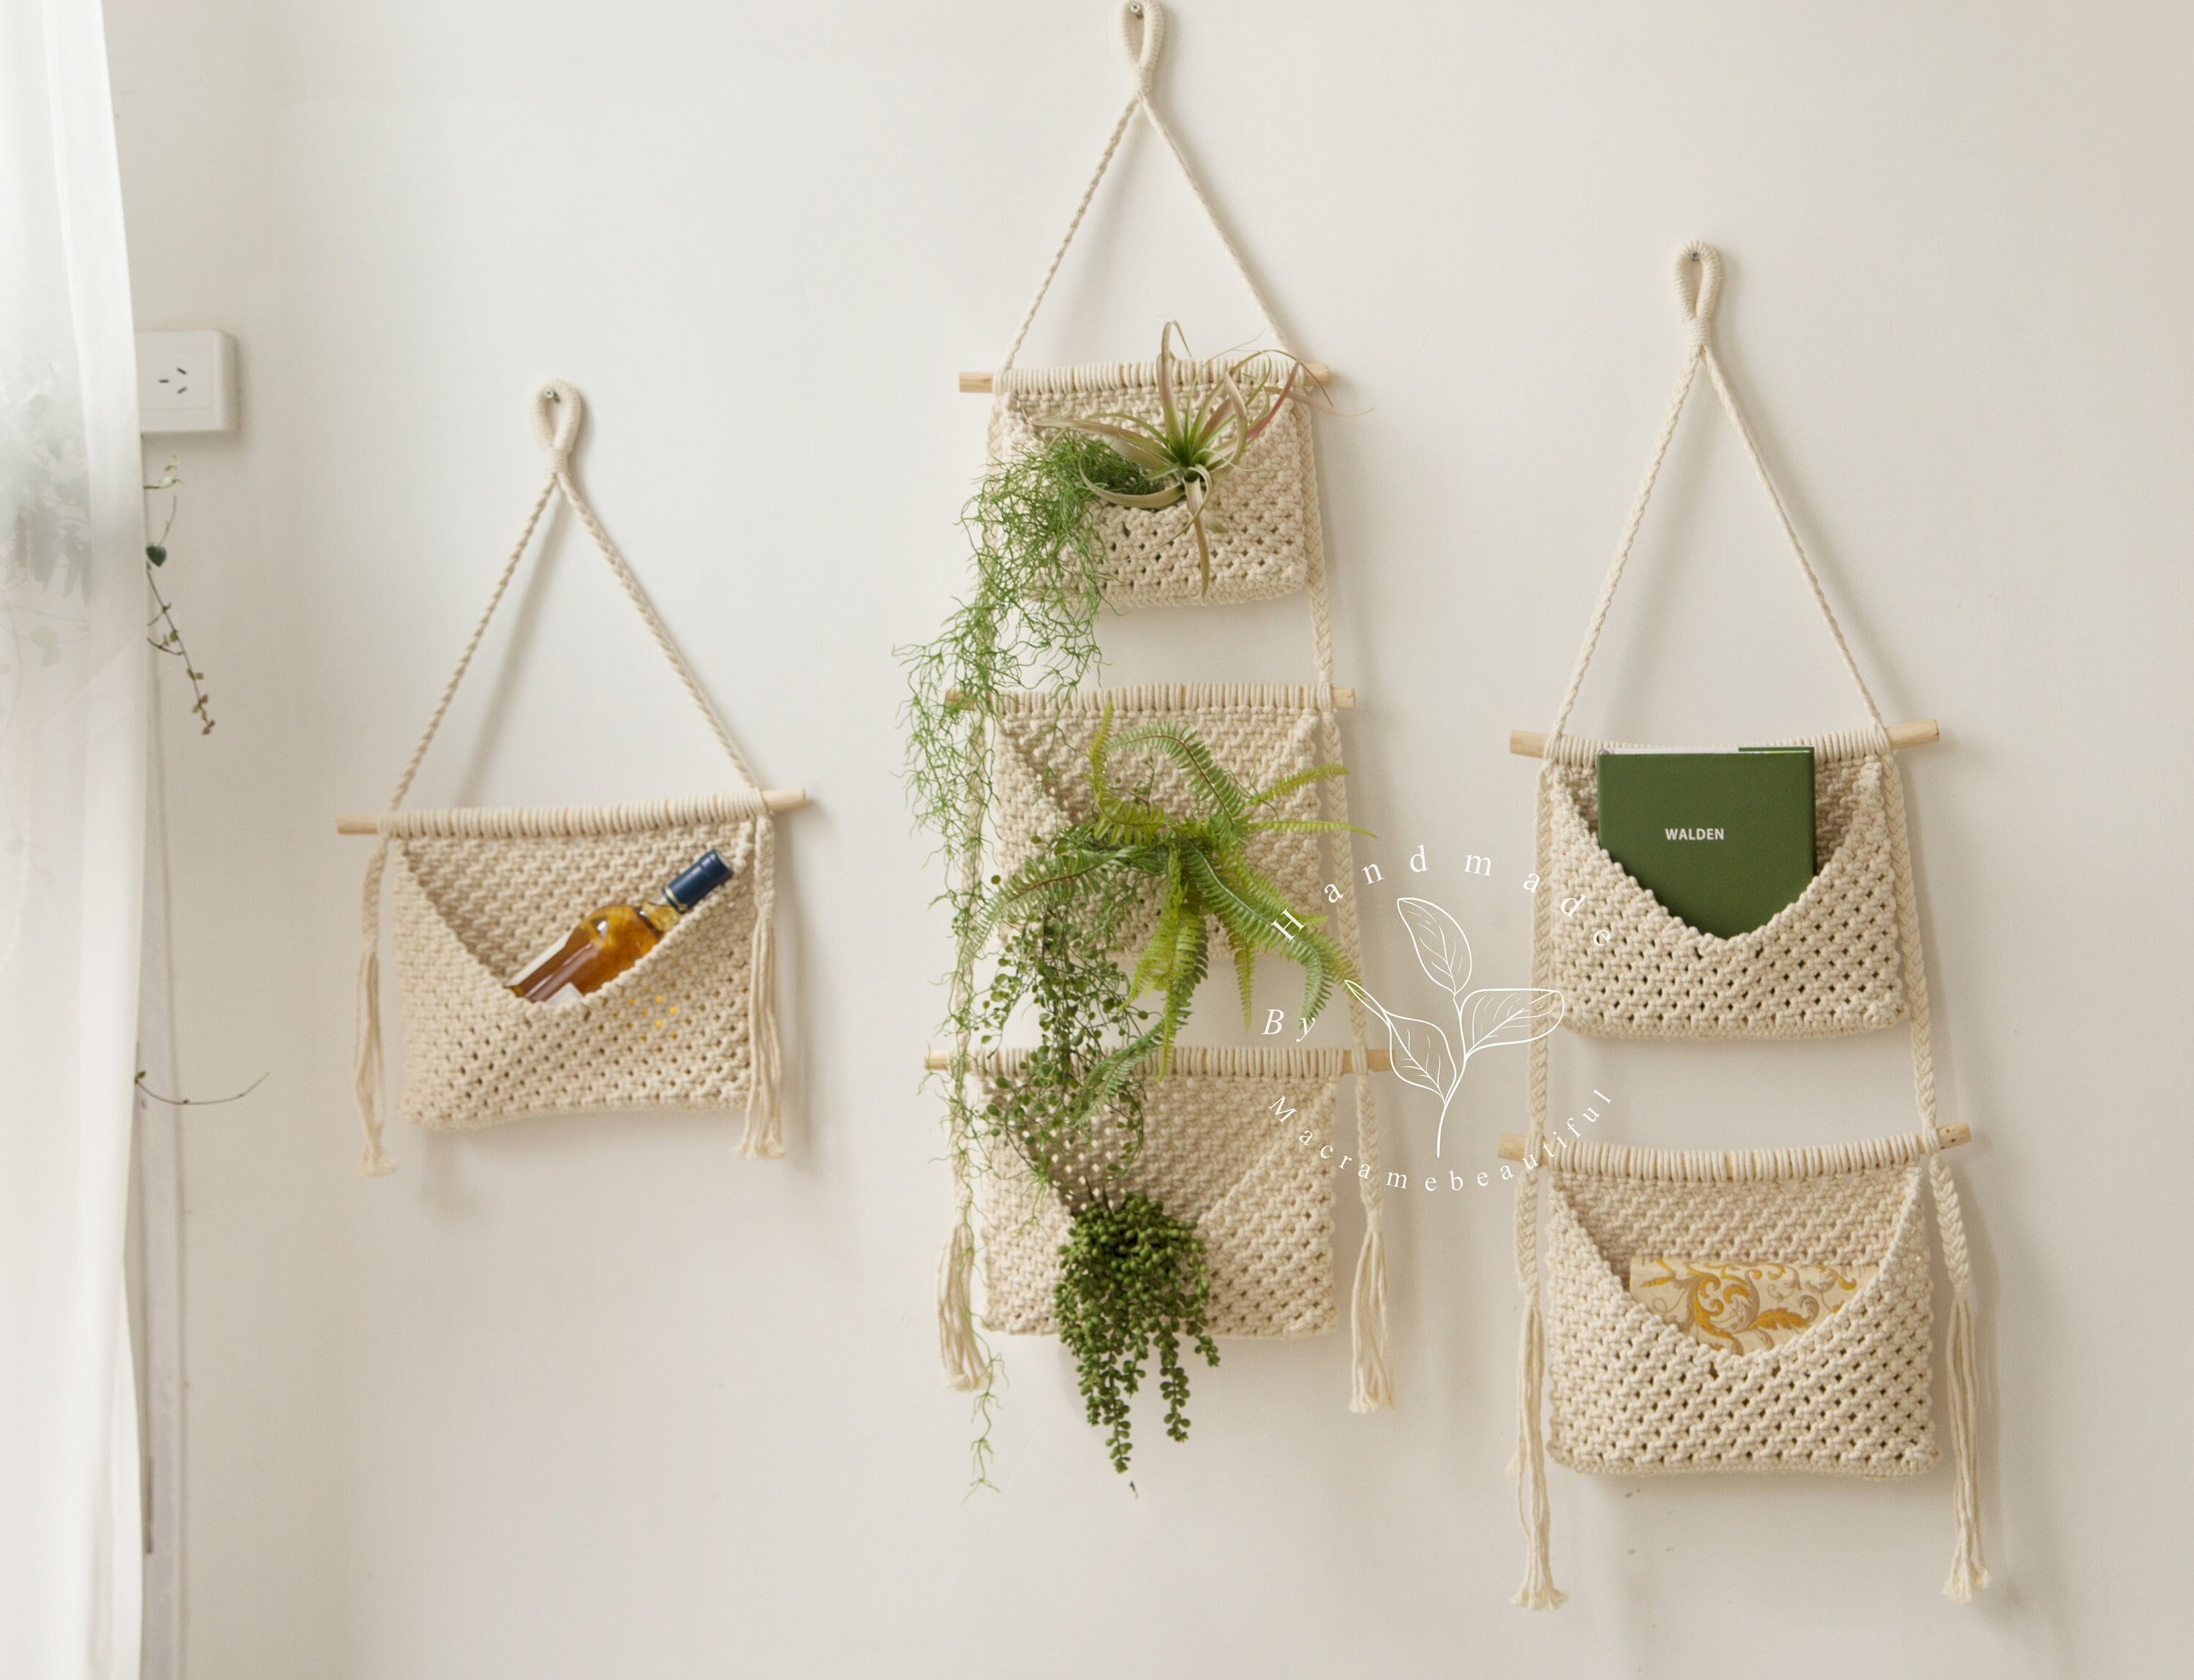 2 Pack of DIY Macrame Books - Hang It Up & Have A Seat